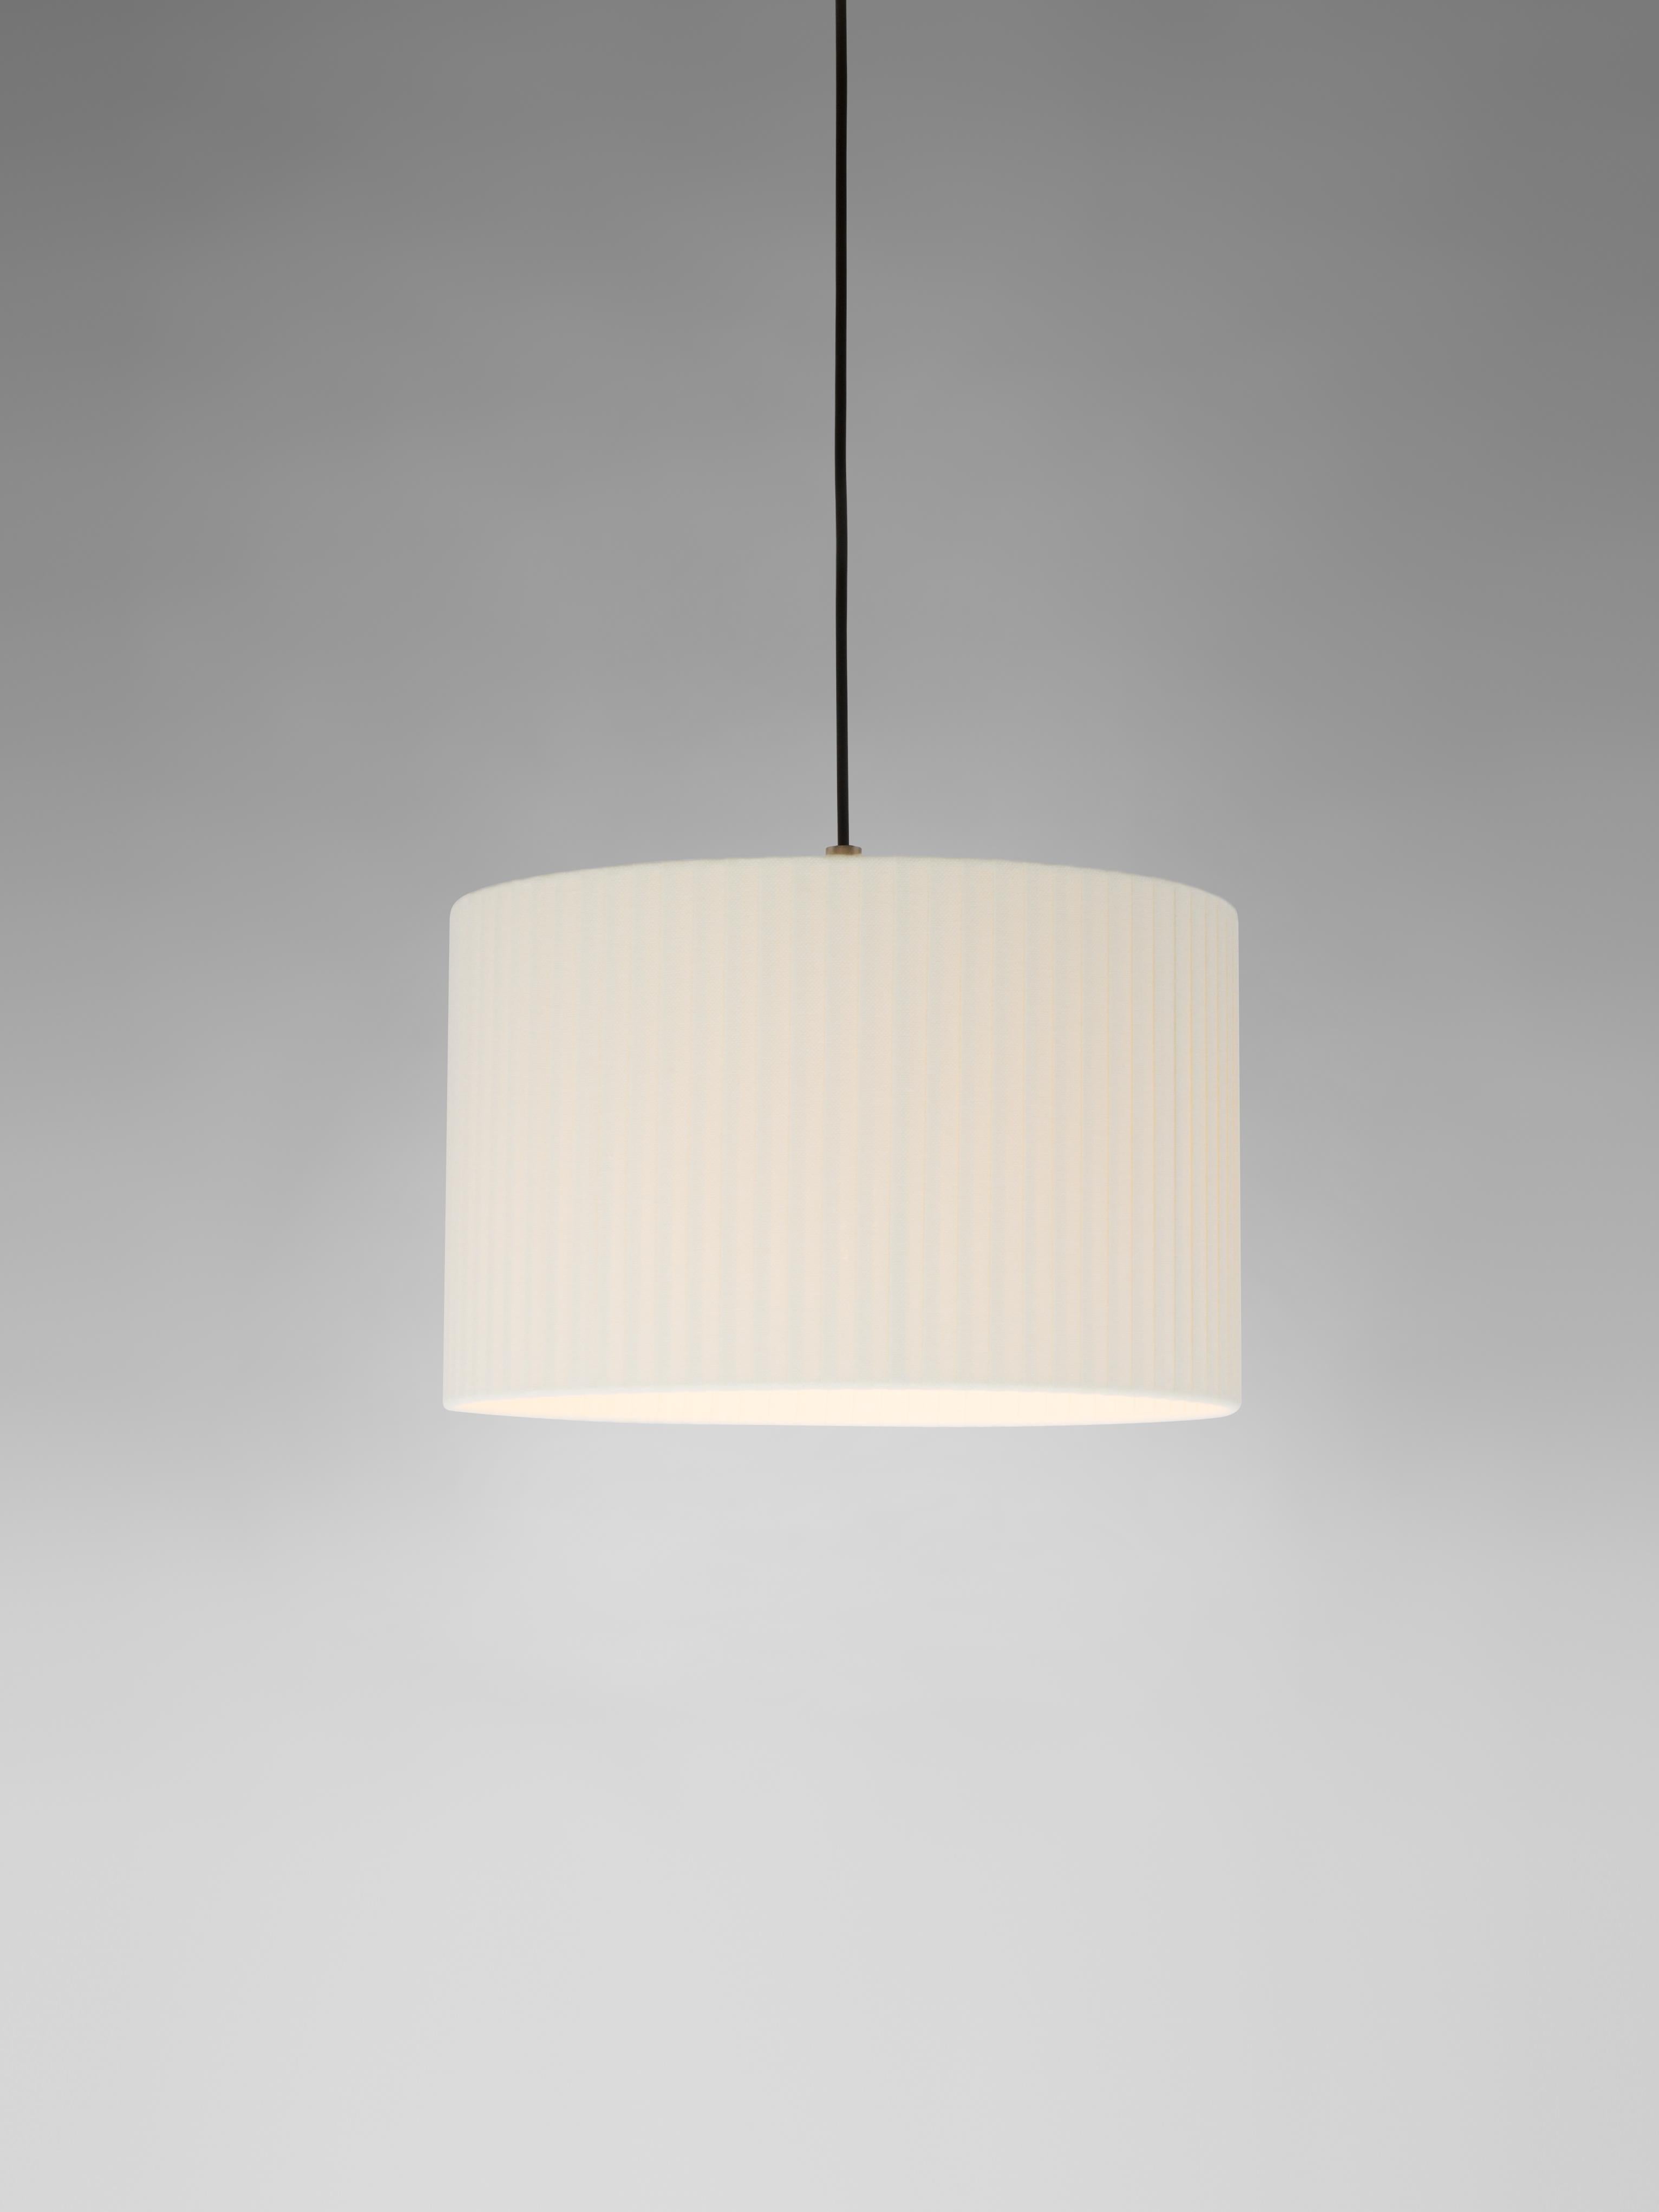 Natural Sísísí Cilíndricas PT2 pendant lamp by Santa & Cole
Dimensions: D 27 x H 17 cm
Materials: Metal, ribbon.
Available in stitched beige parchment or natural ribbon.

Cylindrical in shape, there are two sizes: the PT2 being the small one,